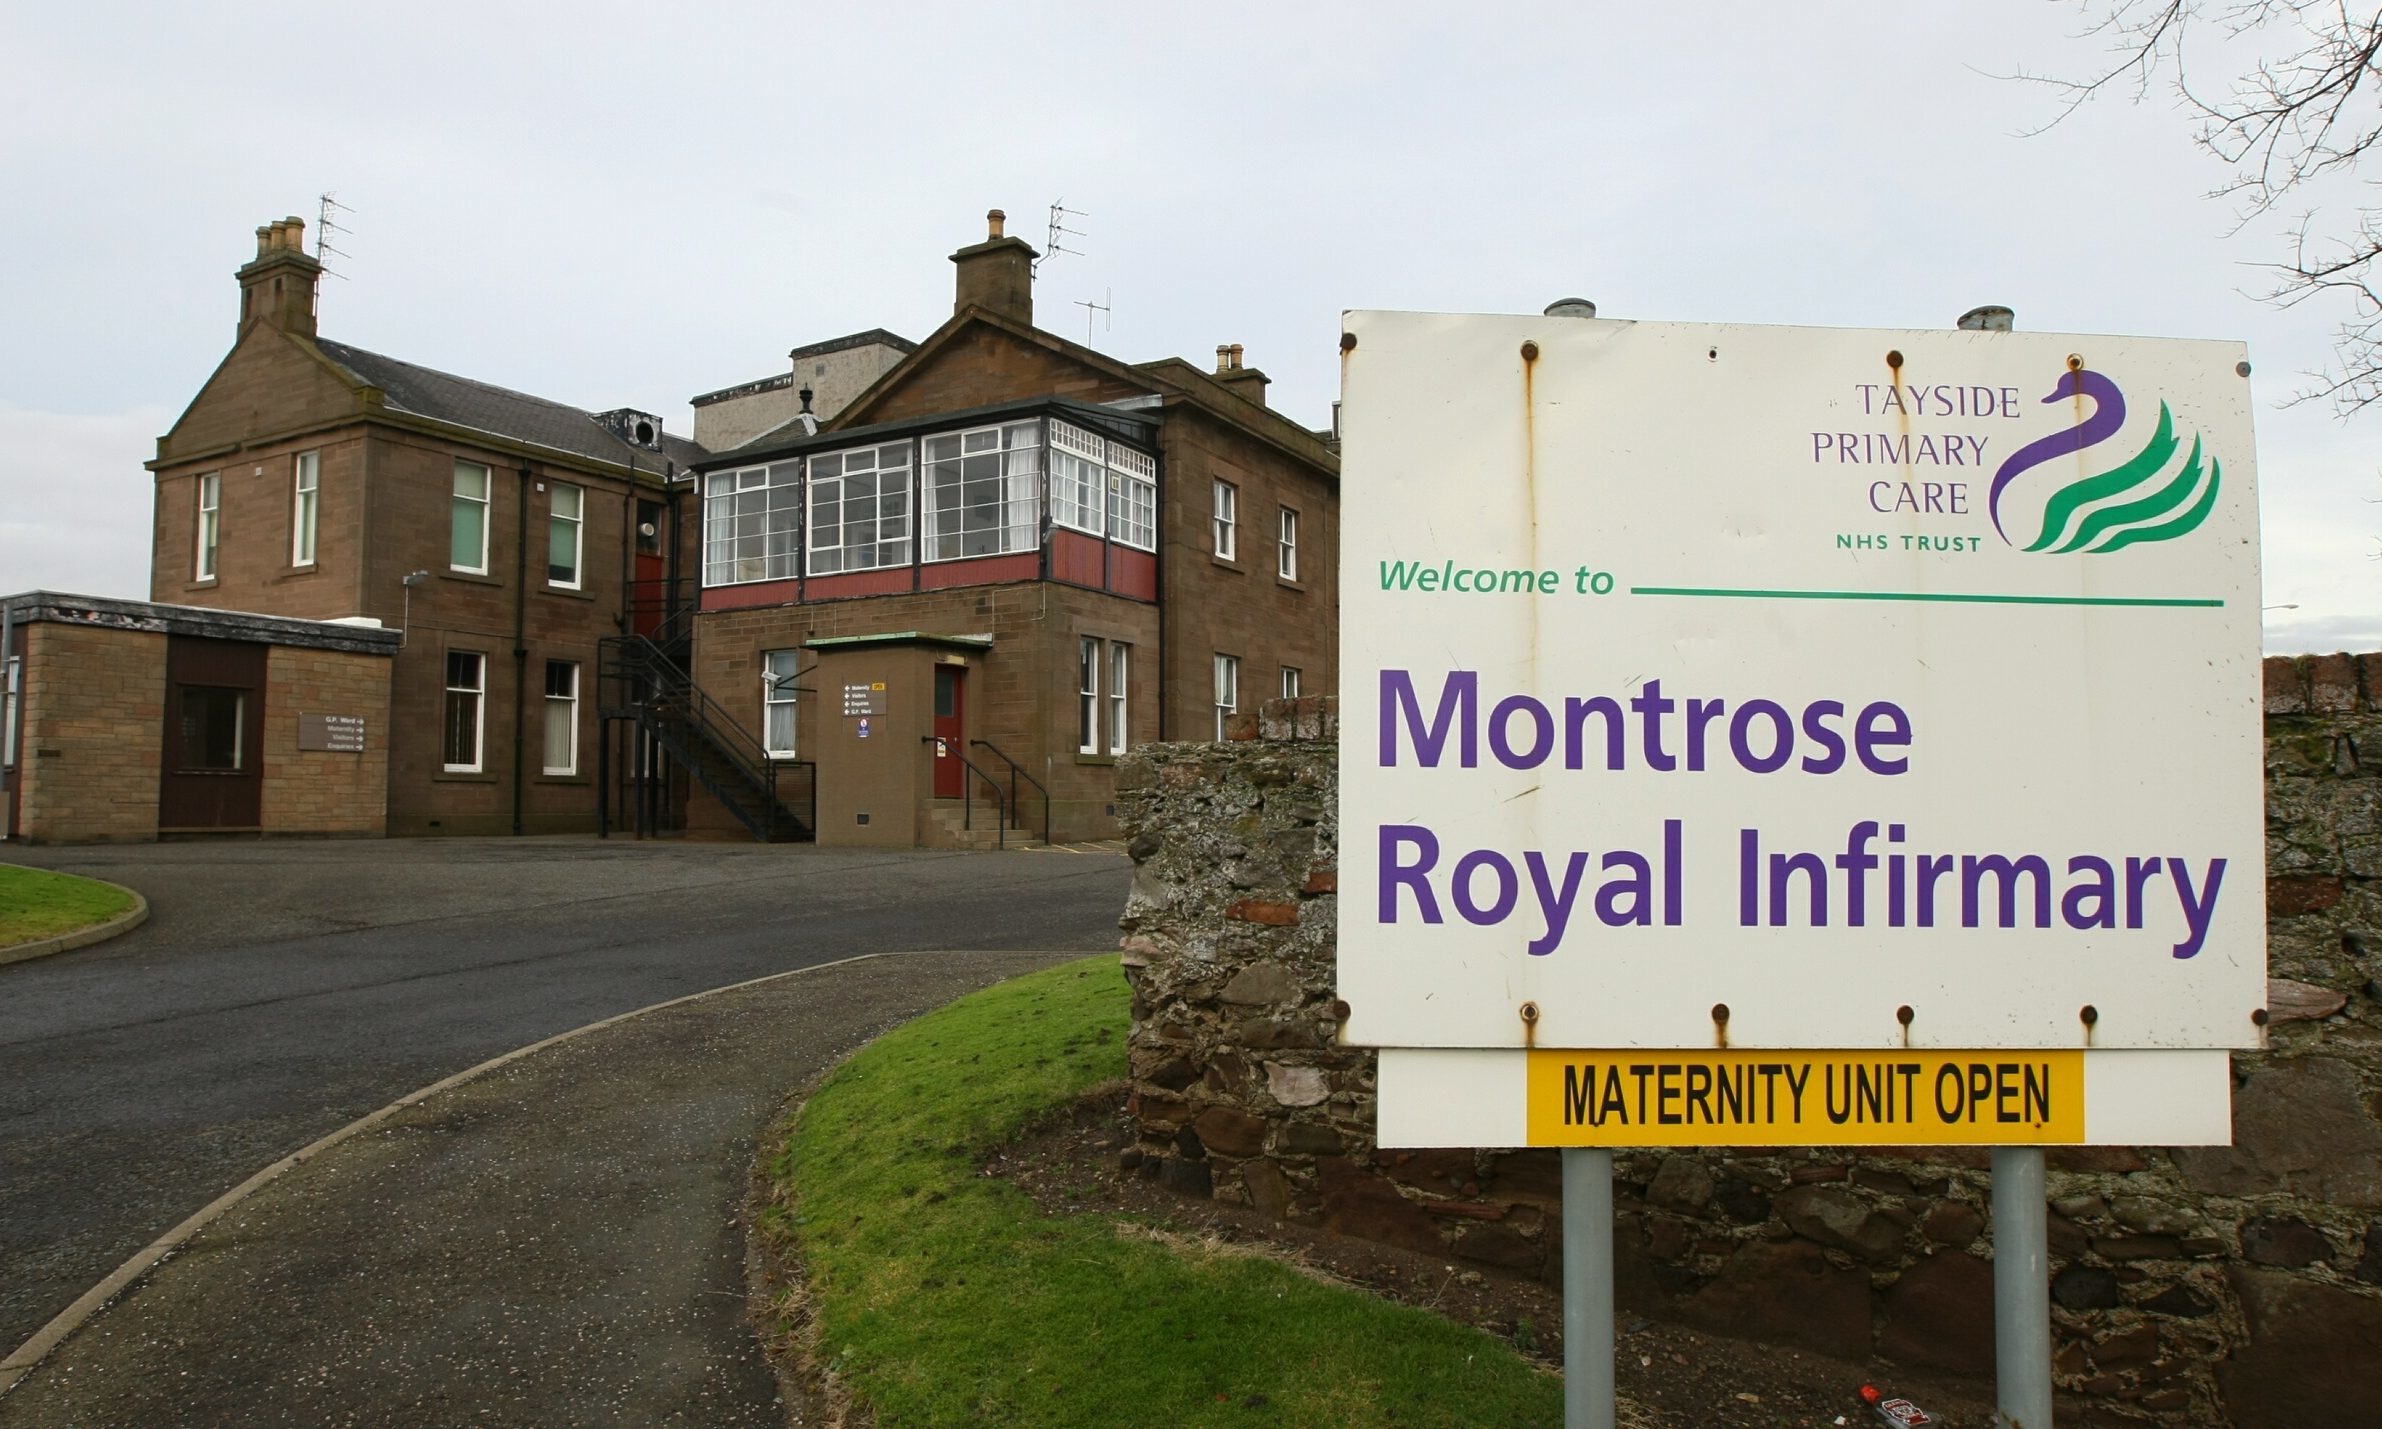 The maternity unit is in Montrose Royal Infirmary.